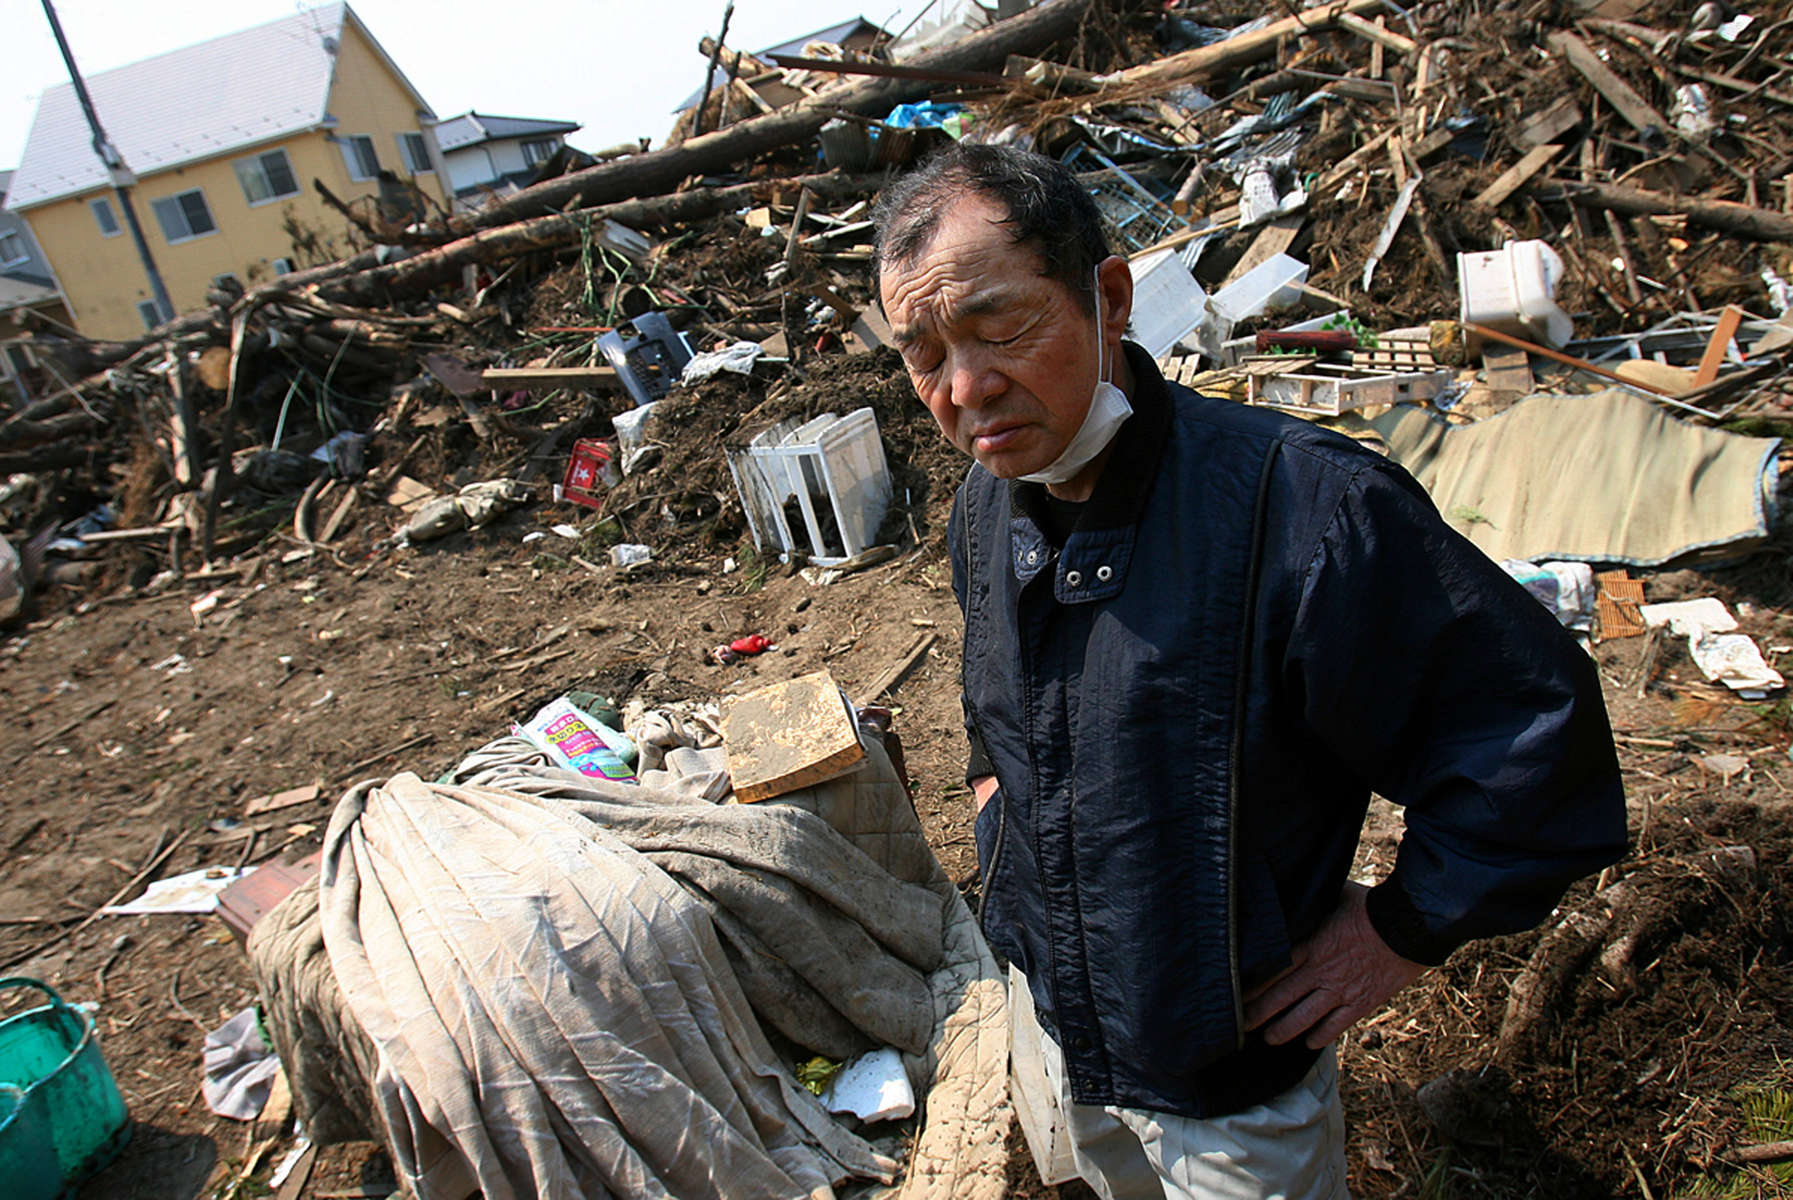 Ichio Hirayama pauses while trying to salvage any personal belongings from his home that was destroyed when the massive tsunami hit Sendai, Japan. (The Press-Enterprise/ Mark Zaleski) 